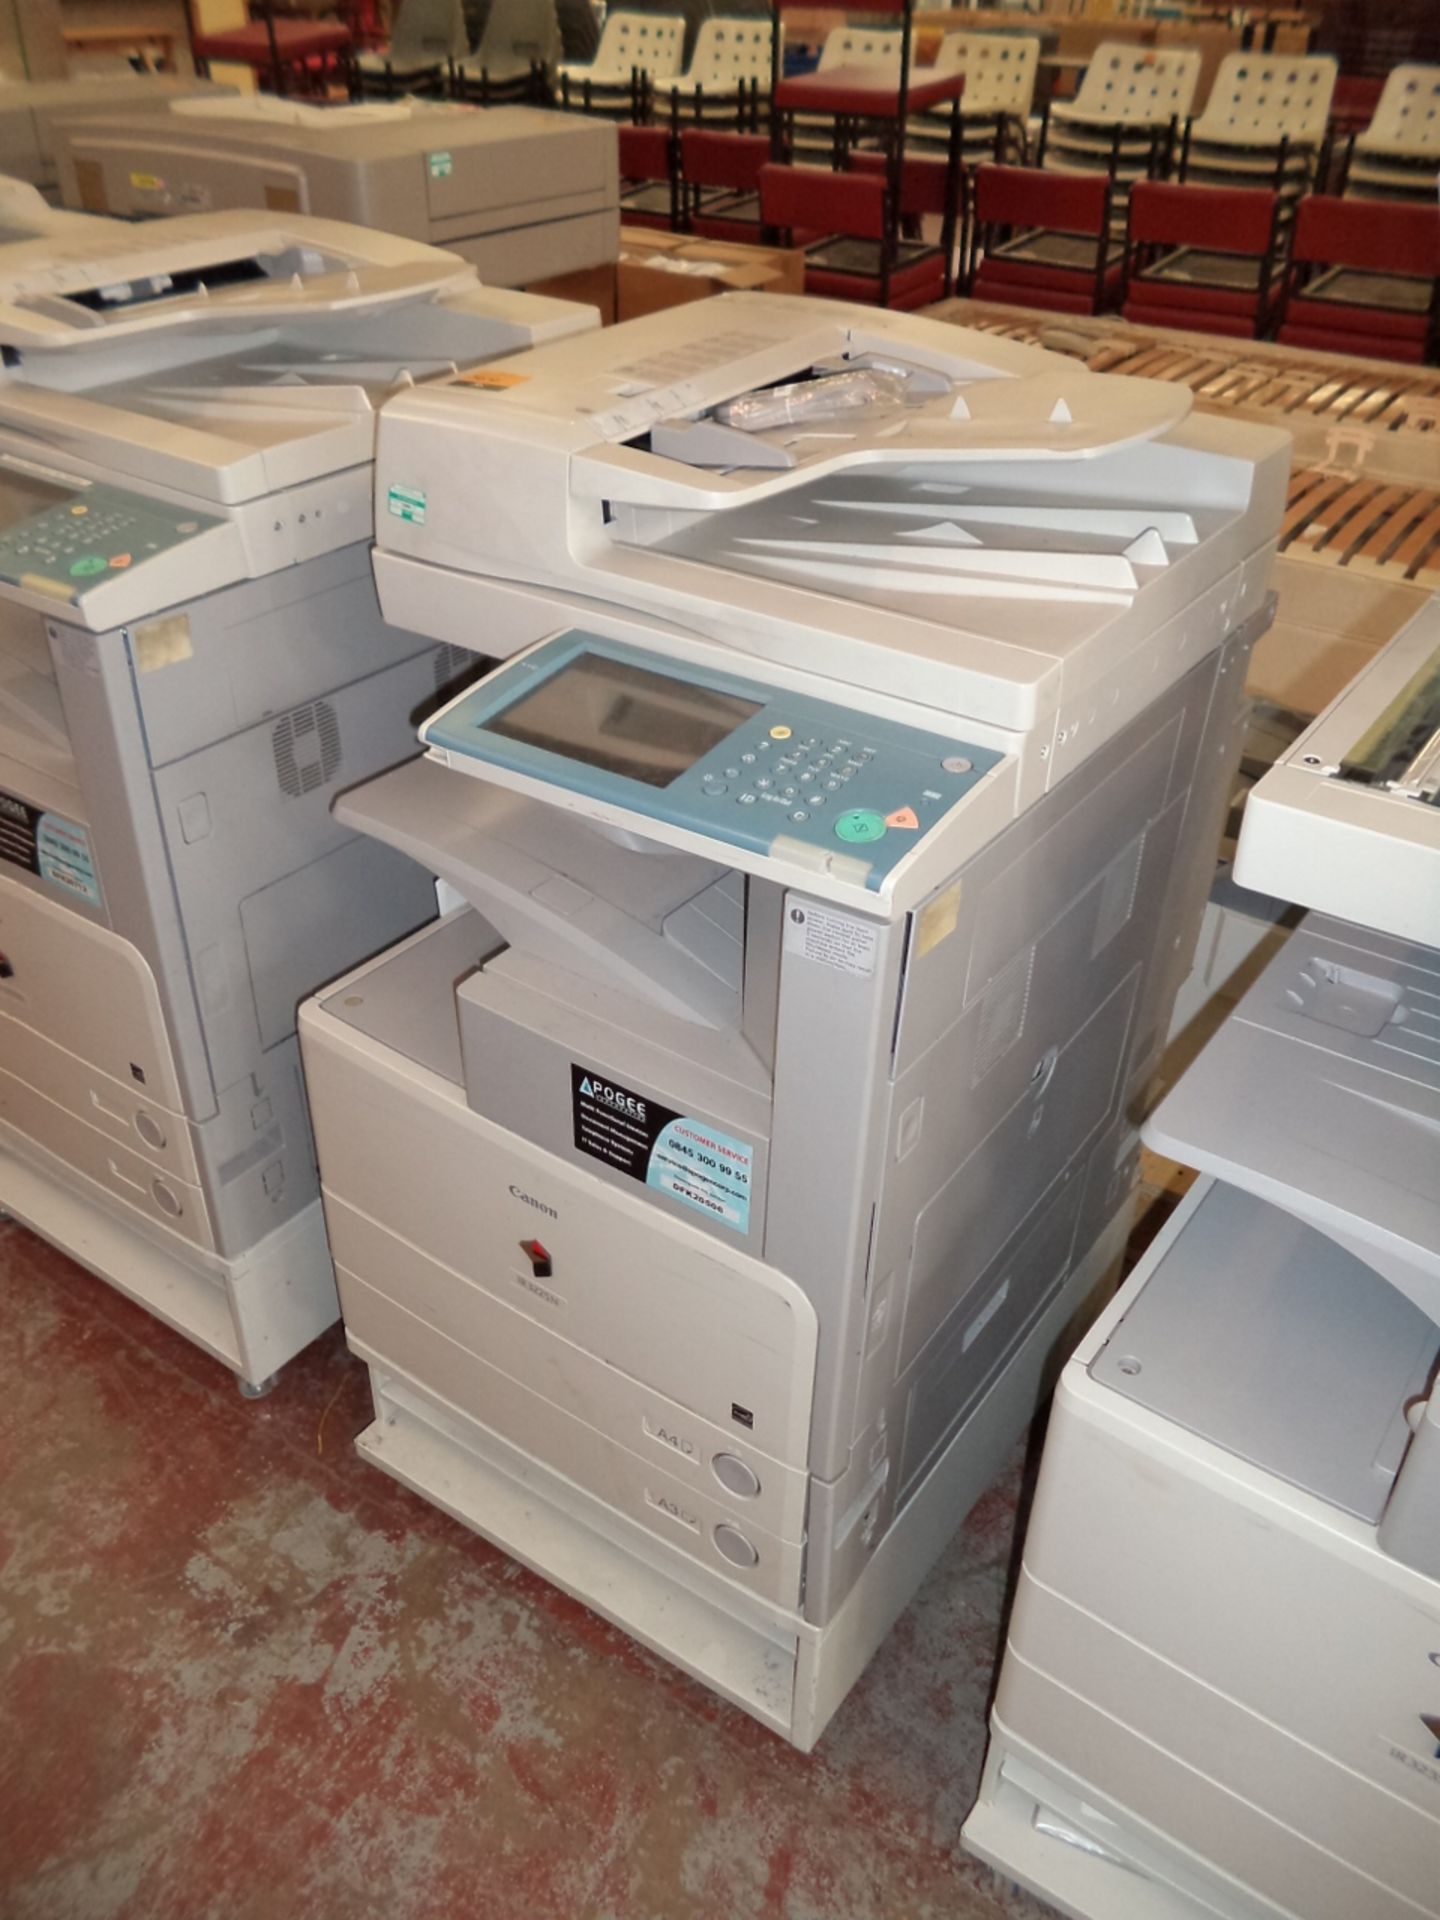 Canon model IR3225N floorstanding copier incorporating 2 off paper cassettes each adaptable for A3